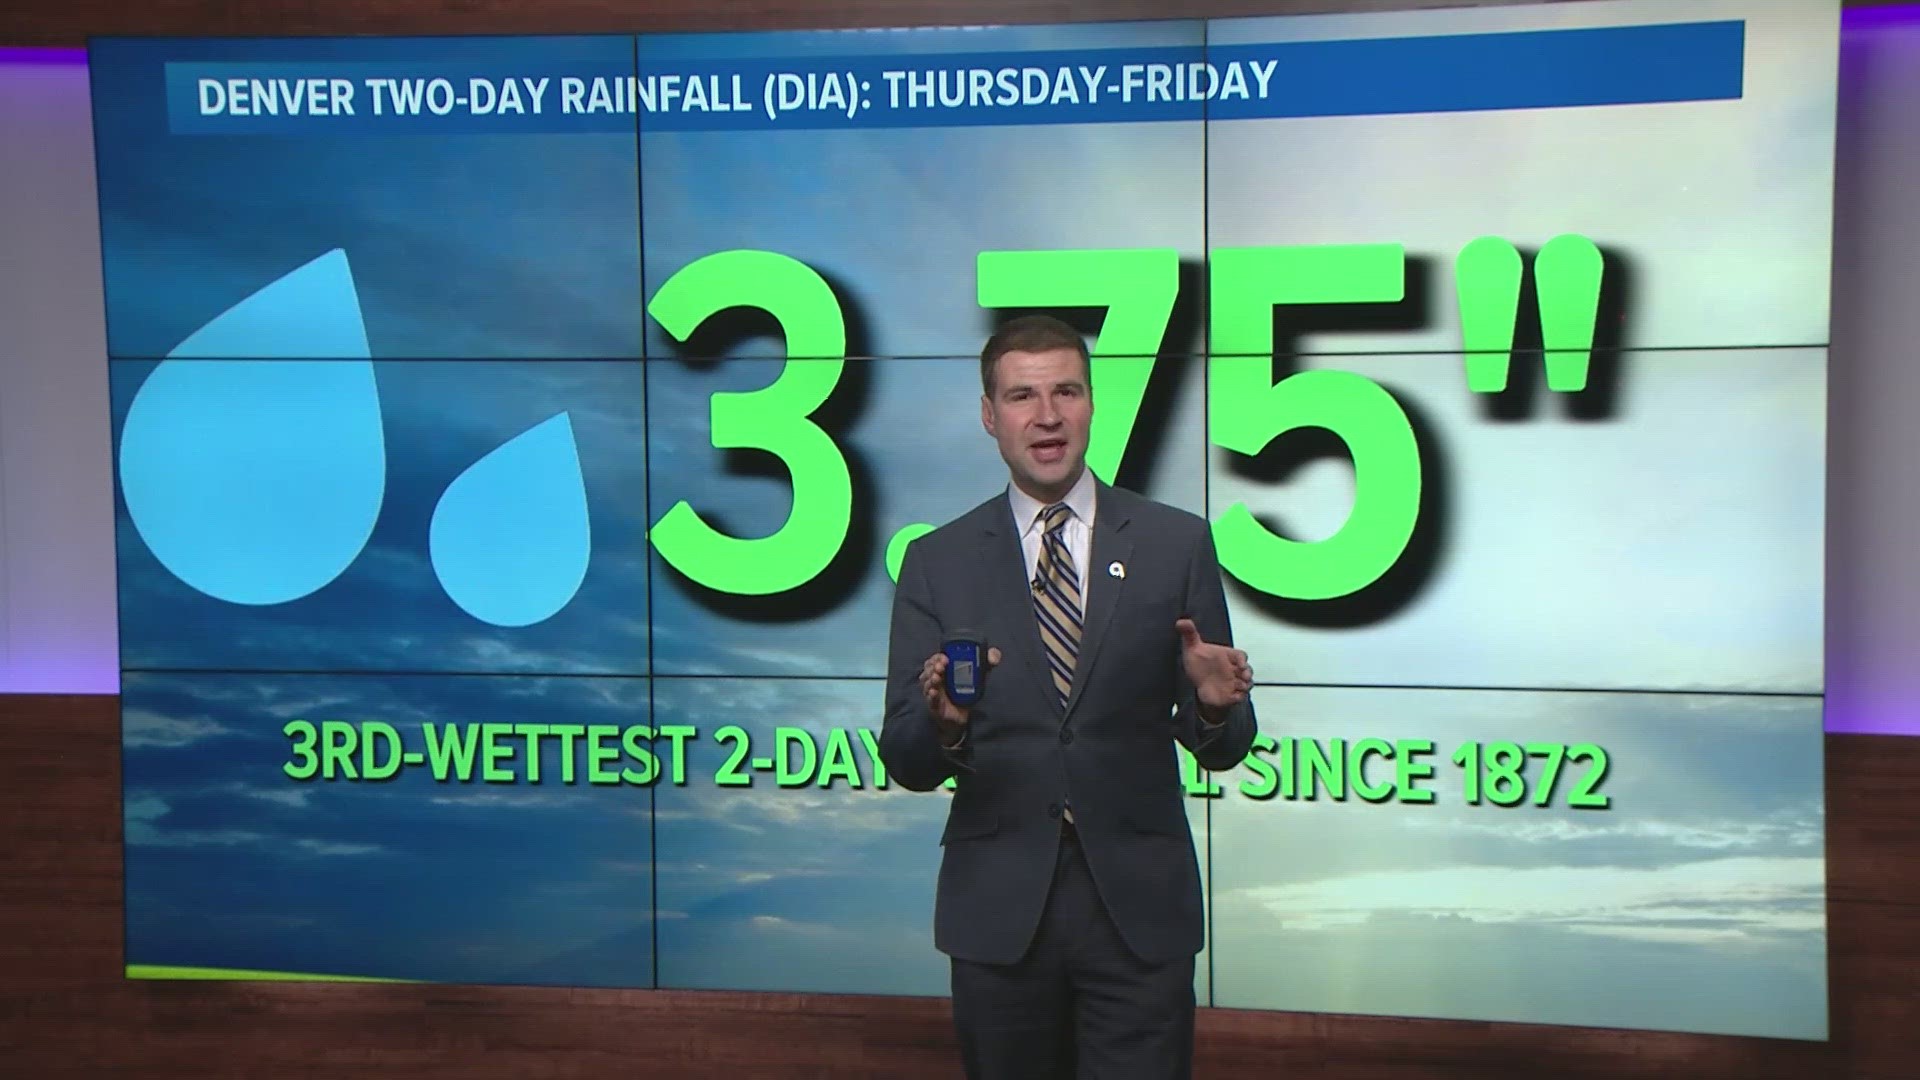 Chris Bianchi breaks down the statistics on this recent rainstorm in the Denver metro area.